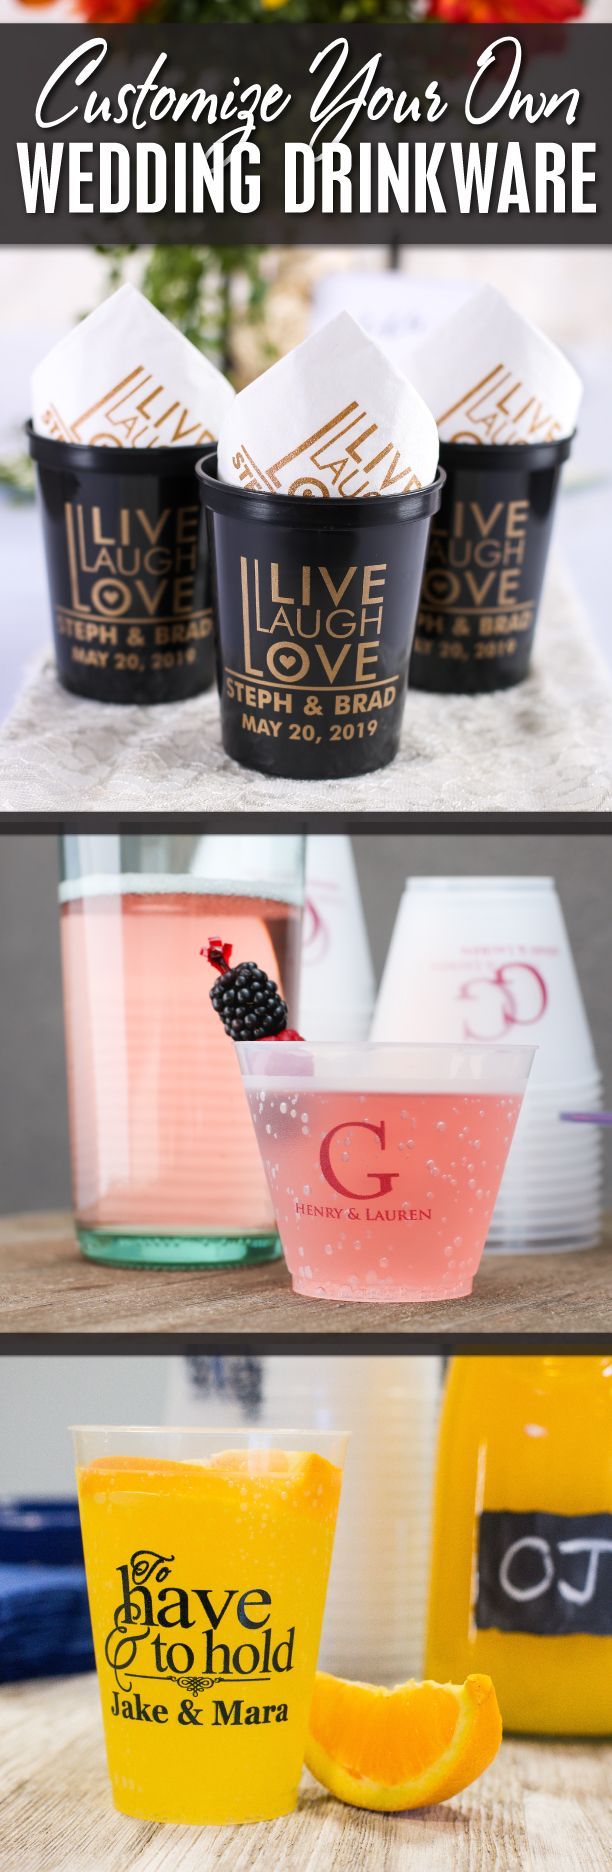 Customize your own #wedding drinkware with us! Wedding drinkware is the perfect fu